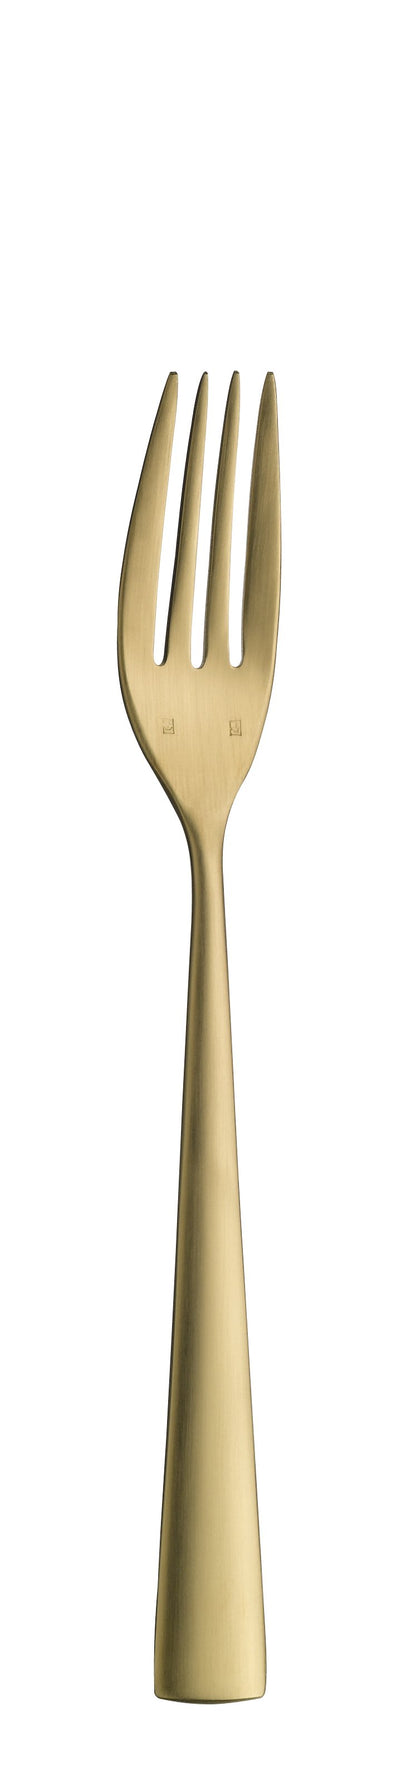 Table fork ACCENT PVD gold brushed 202mm